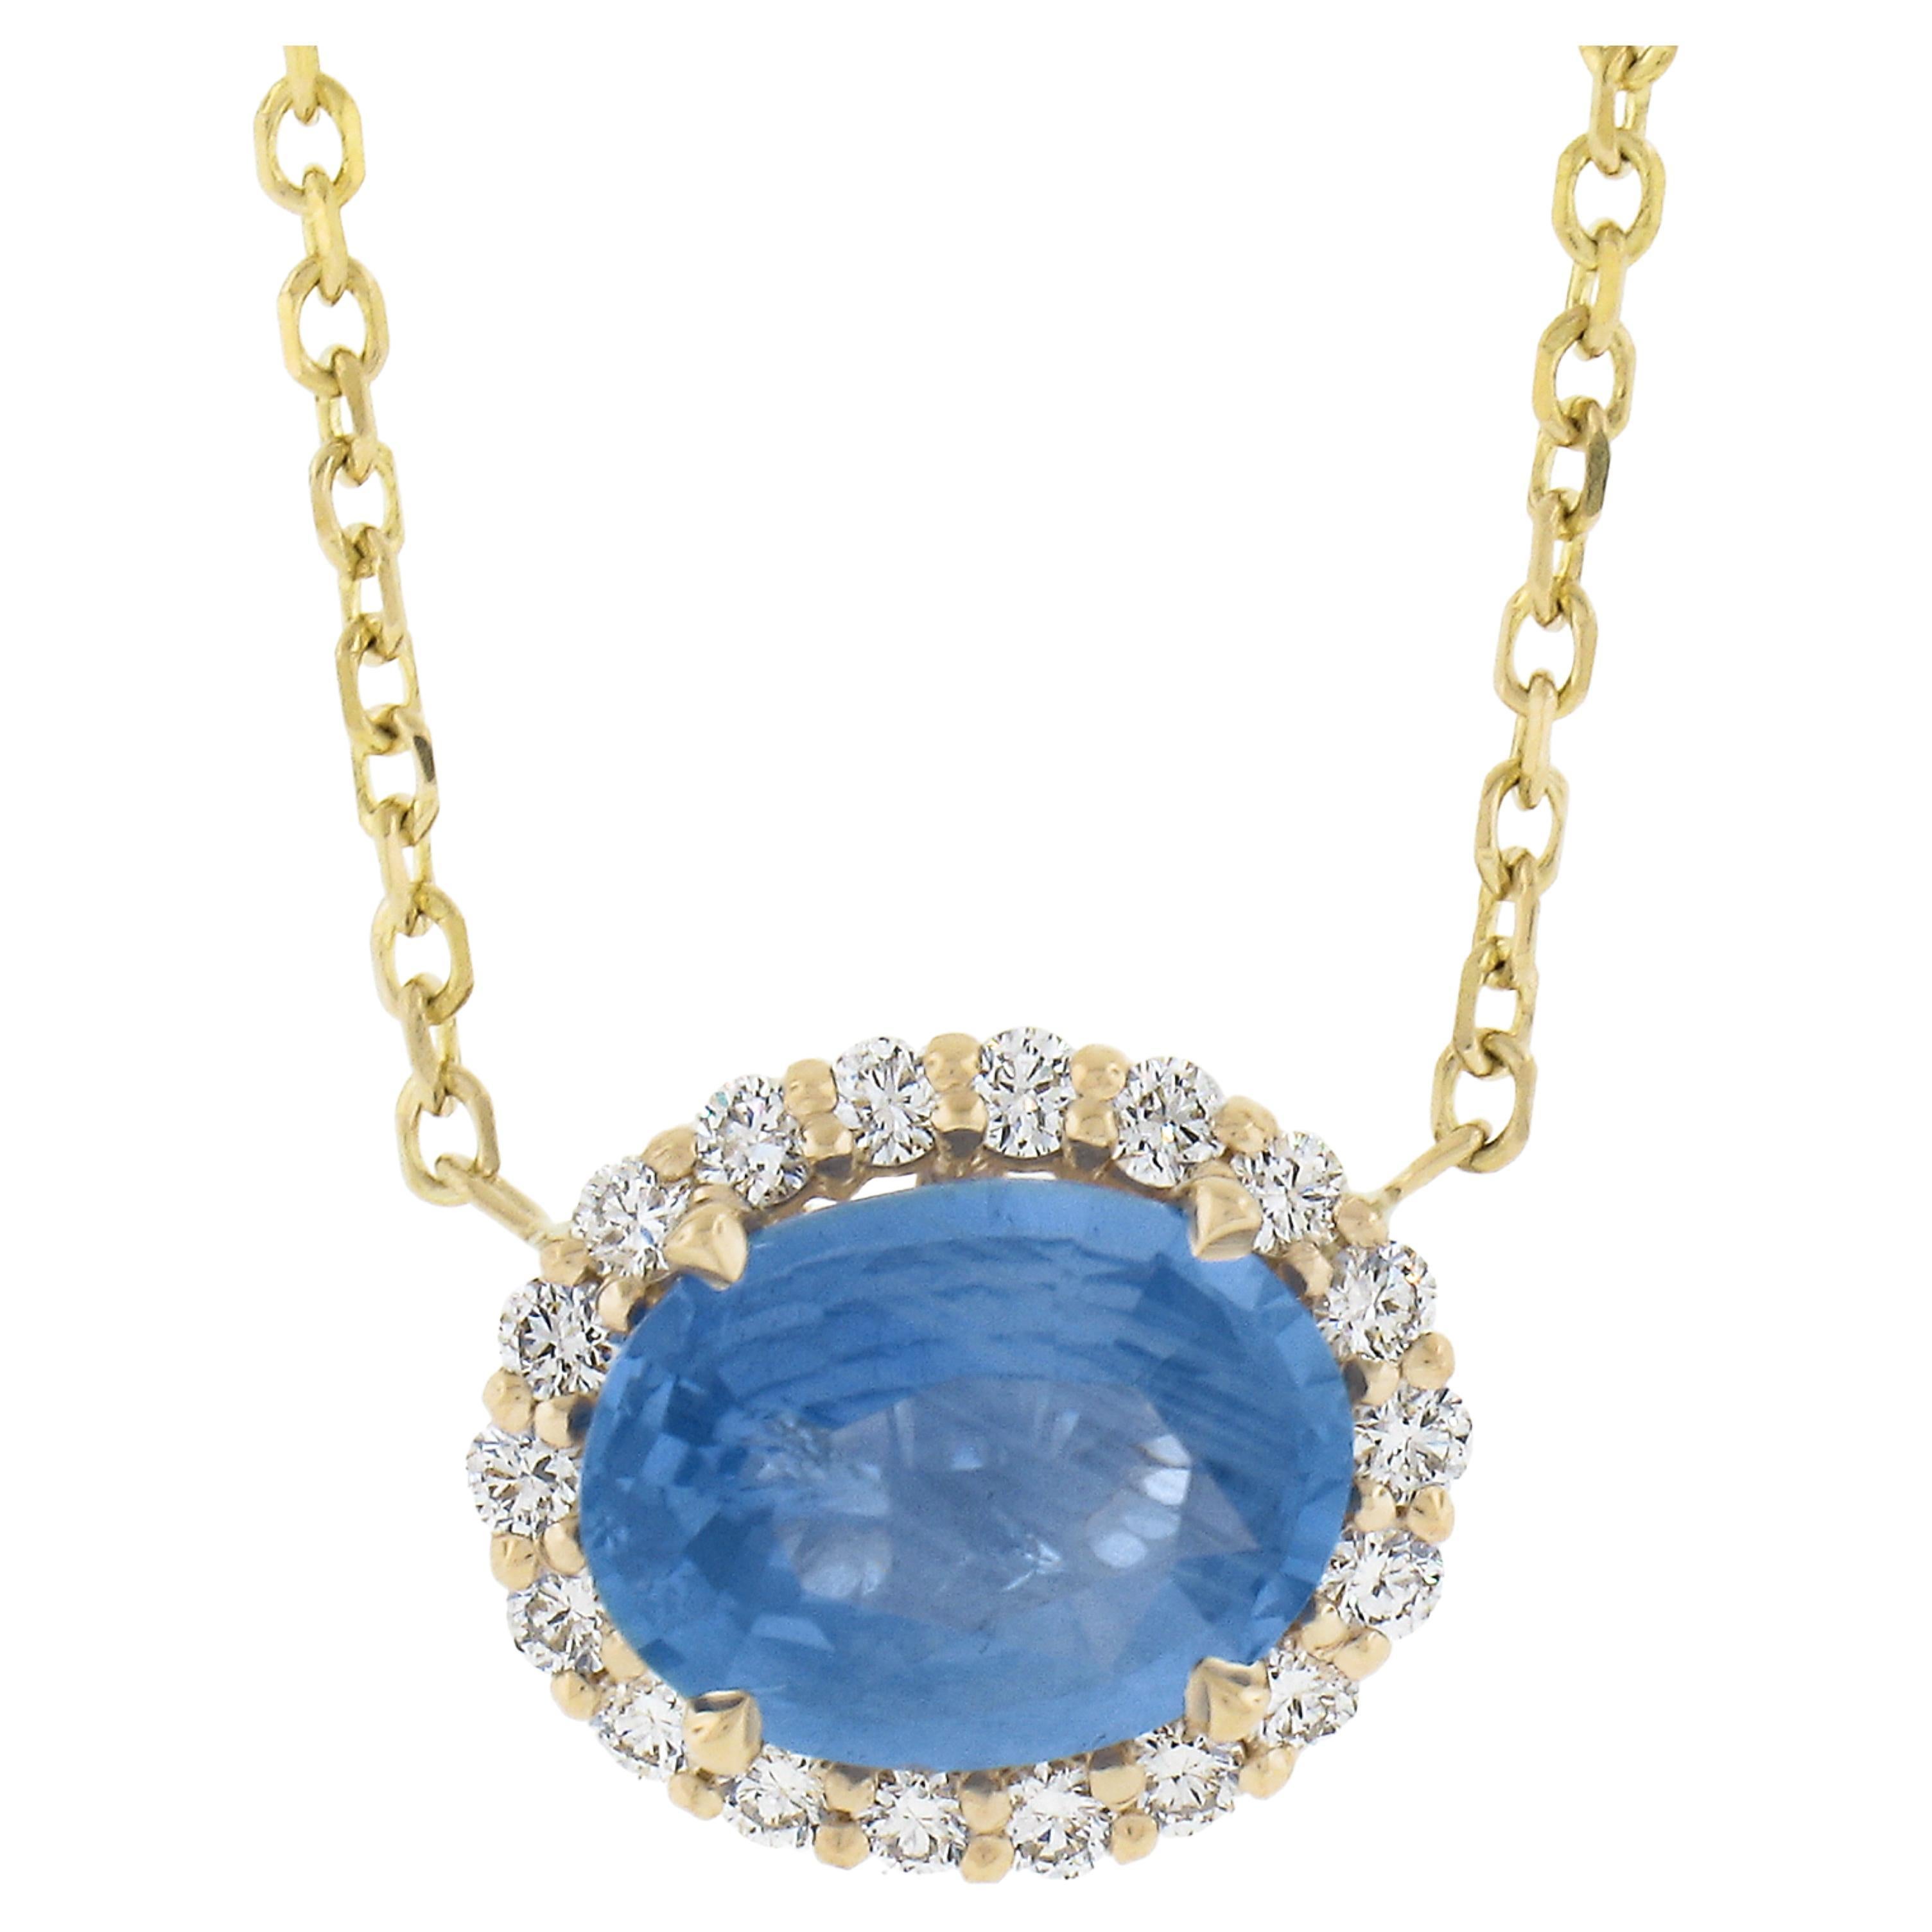 NEW 14k Gold 3.34ctw GIA Oval Blue Sapphire Diamond Halo Pendant Necklace For Sale